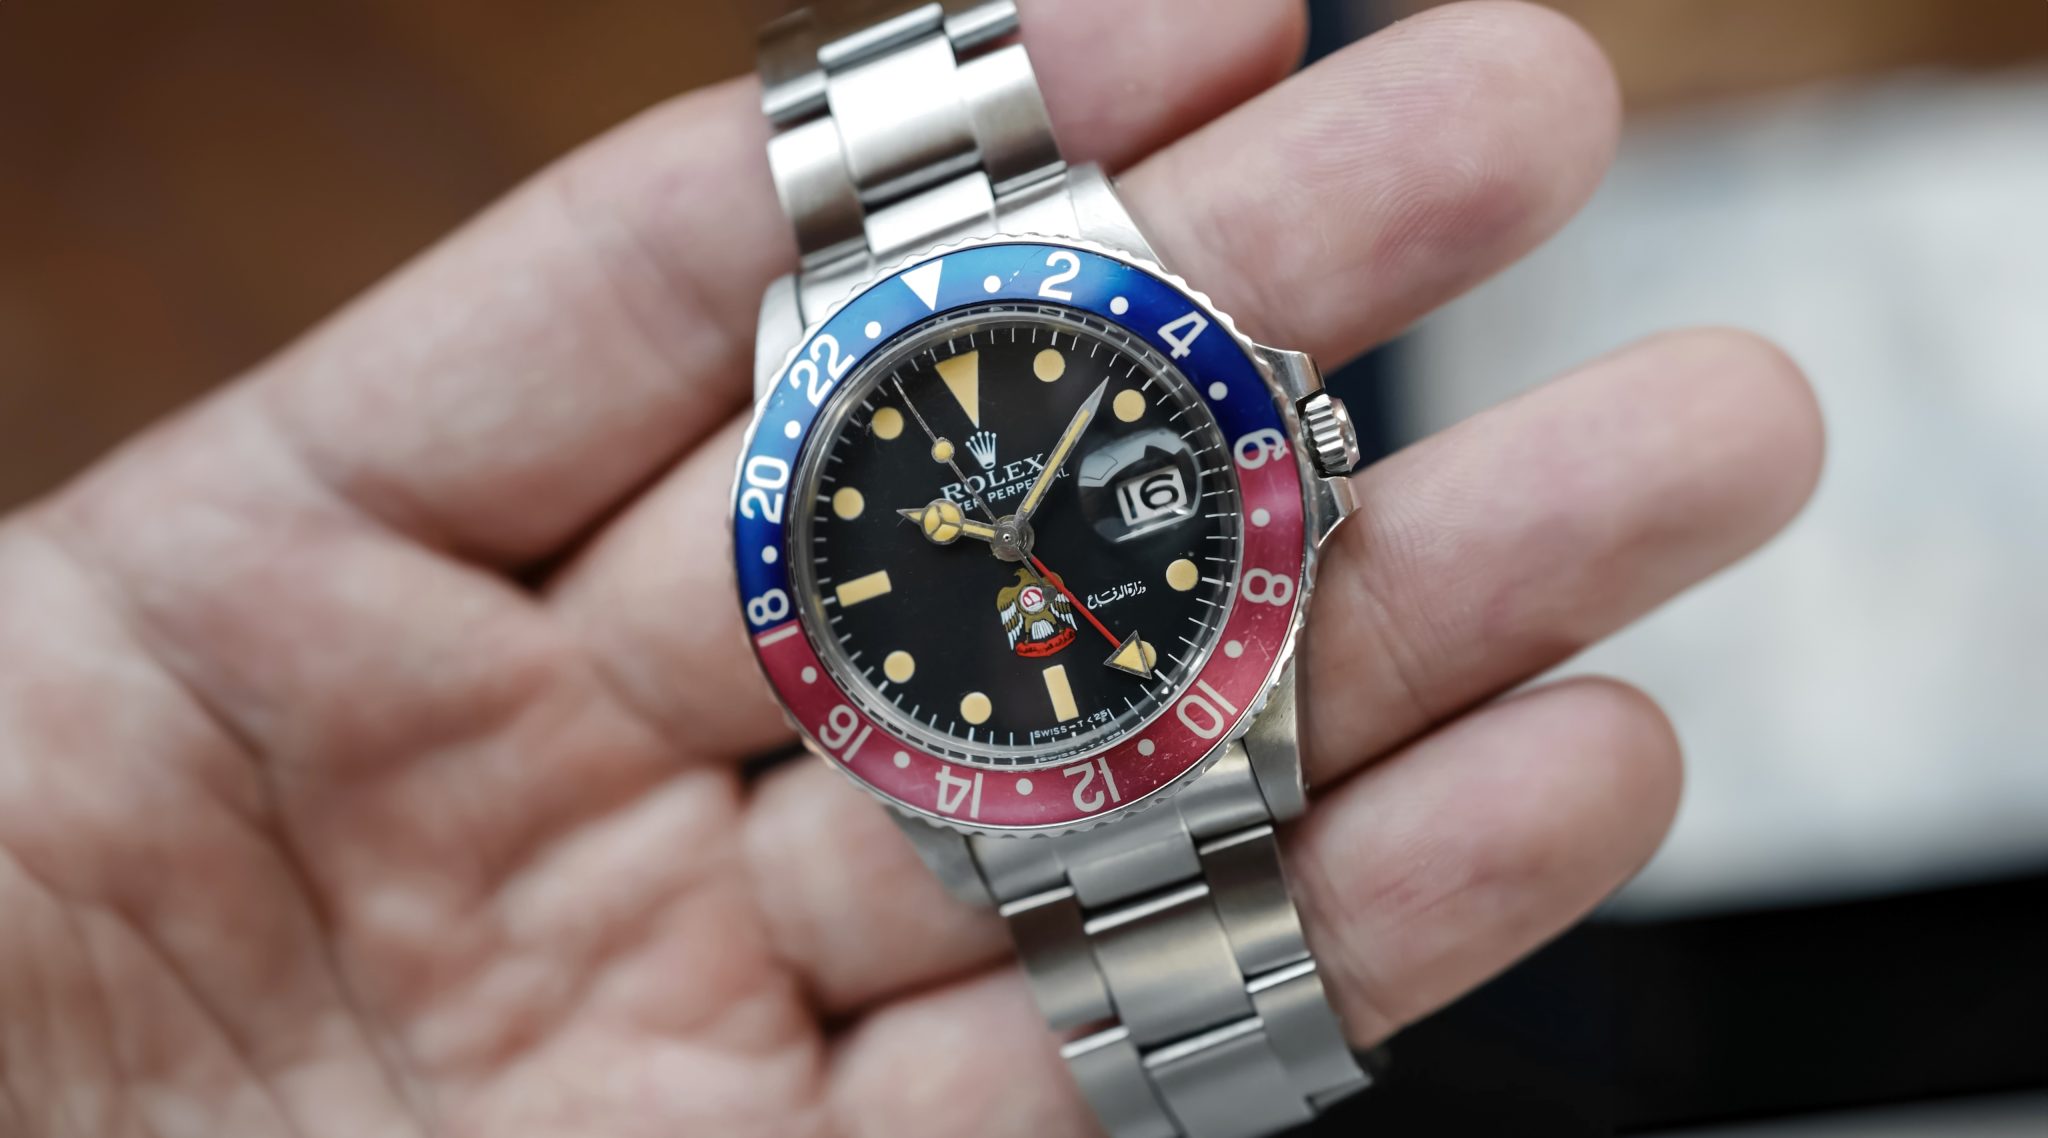 UAE-Ministry-of-Defence-1675-Rolex-GMT-Master